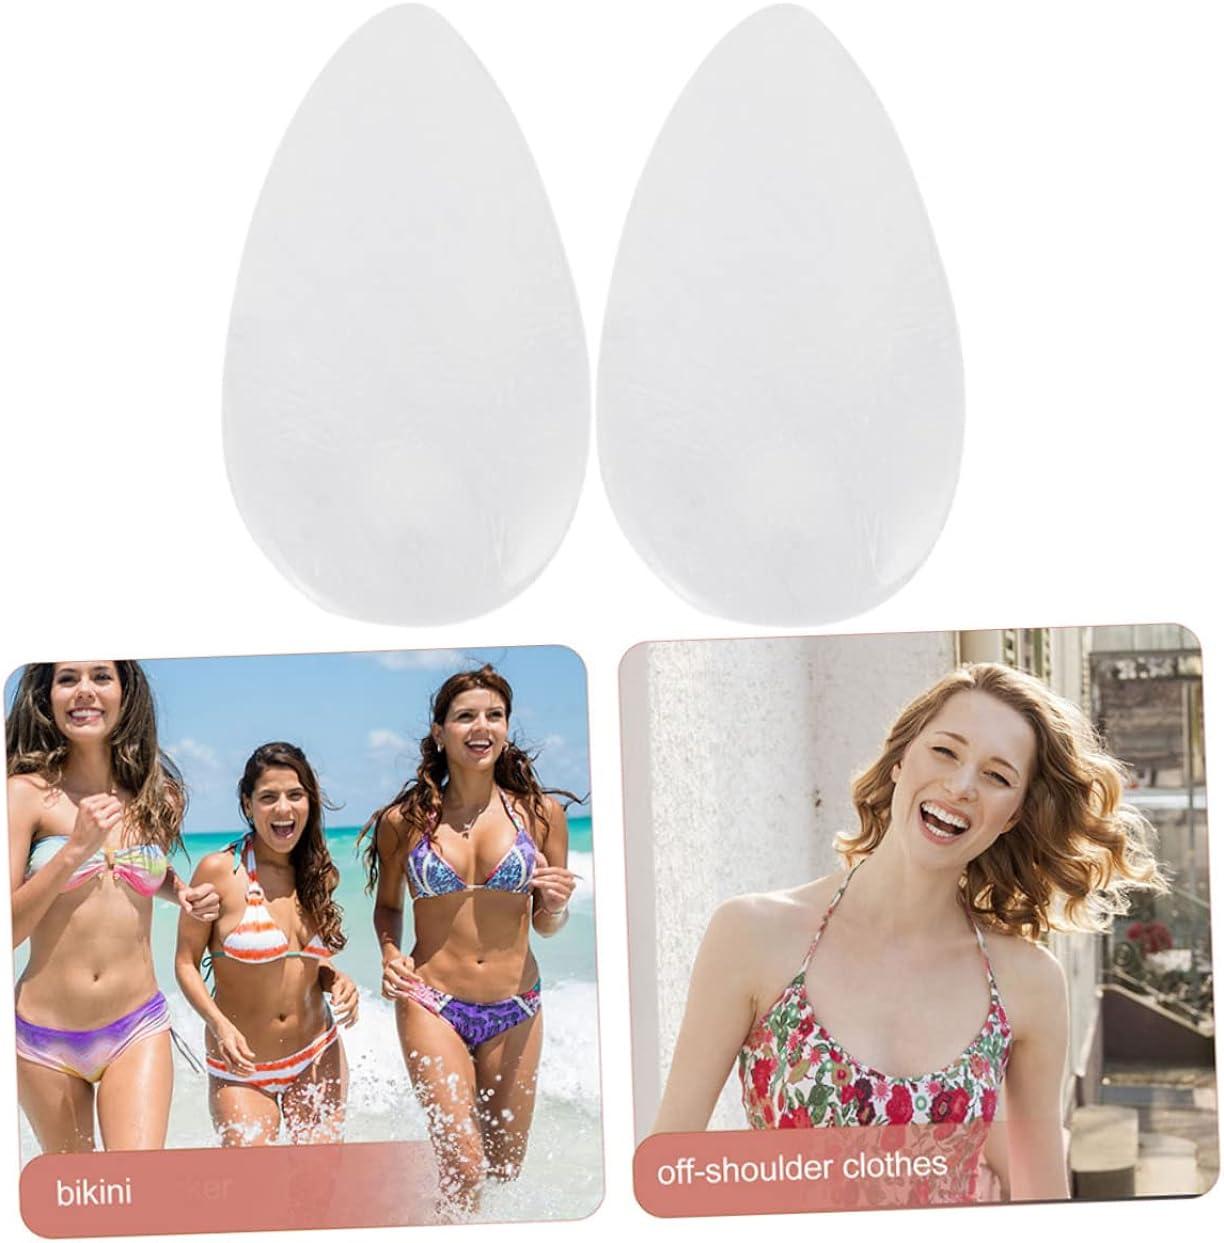 DOITOOL 4 Pcs Private Parts Protector Women's Swimsuit Water Proof